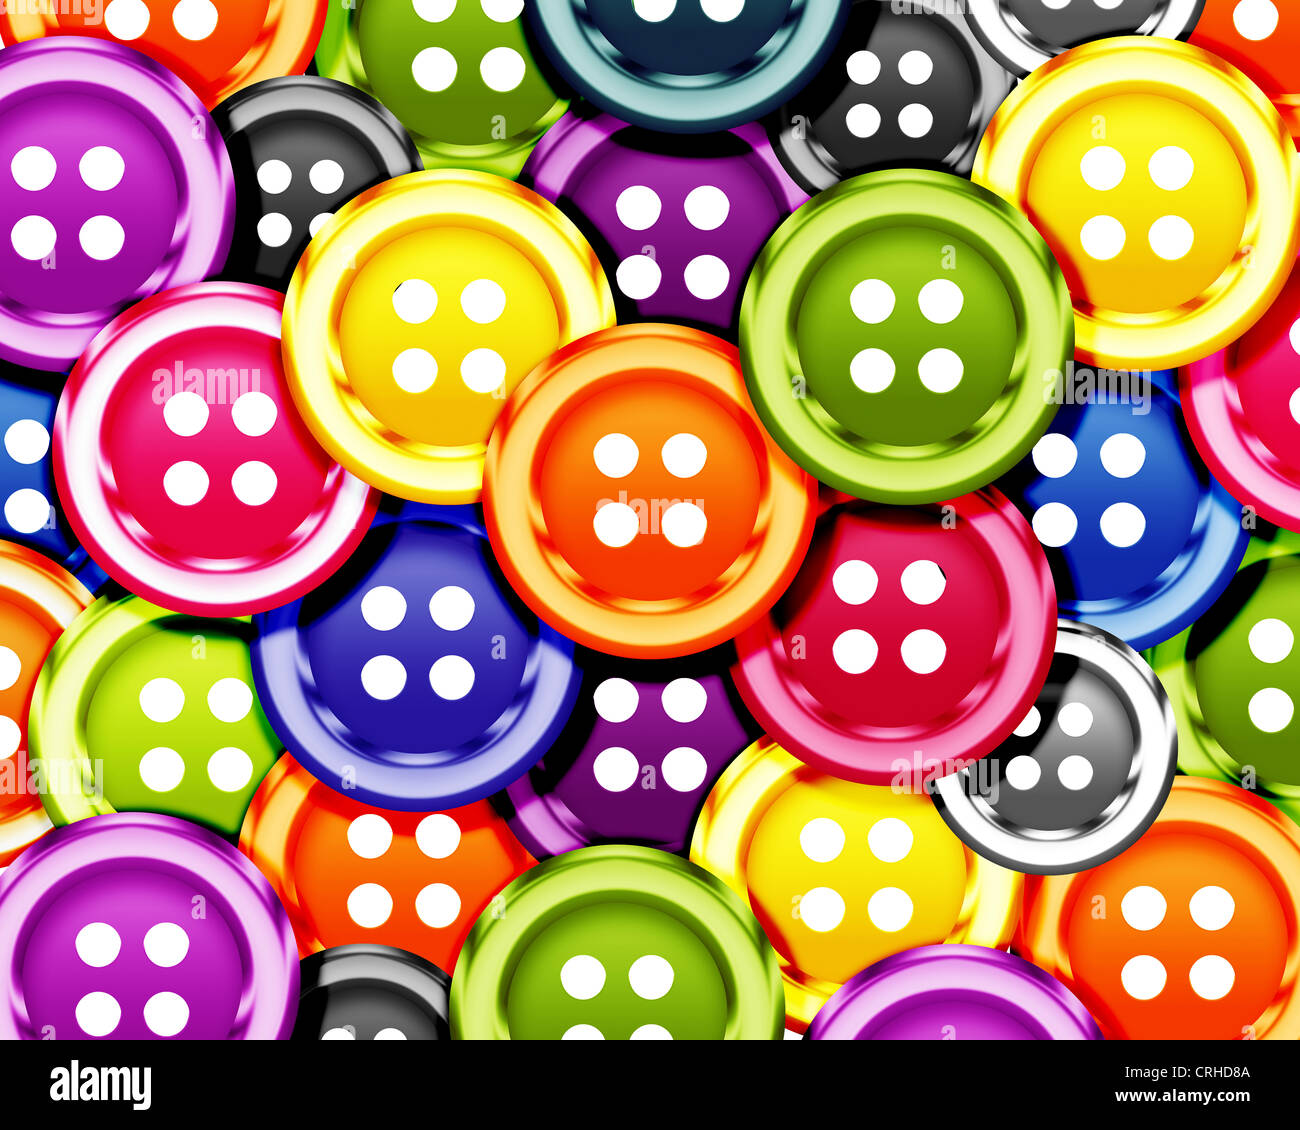 Set of cloth buttons background. Stock Photo